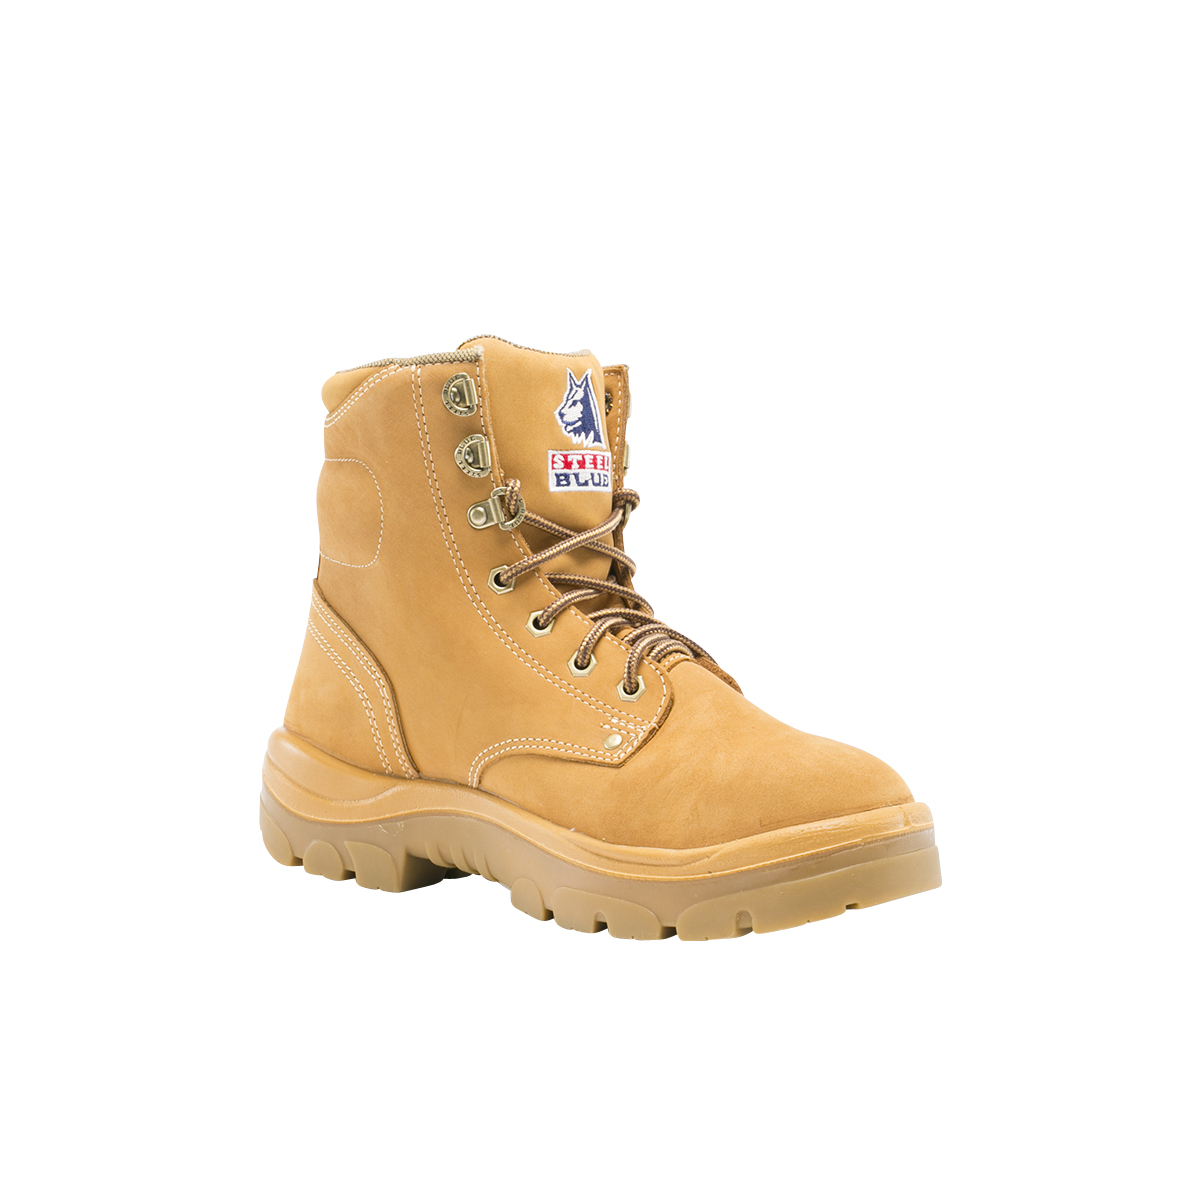 SAFETY BOOT ARGYLE WHEAT S10 -ANKLE LACE UP